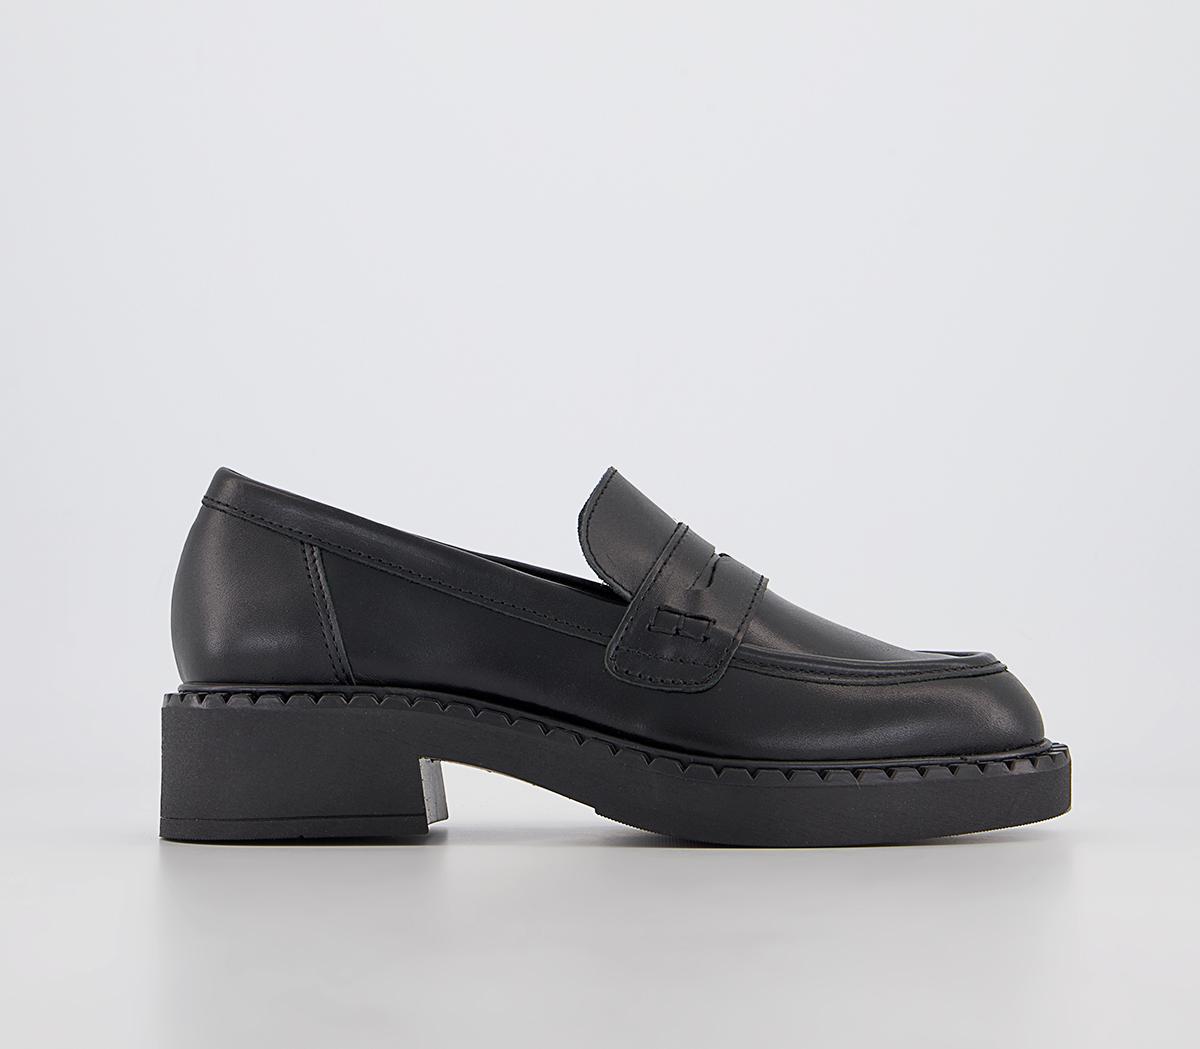 OFFICEFavour Chunky Sole LoafersBlack Leather